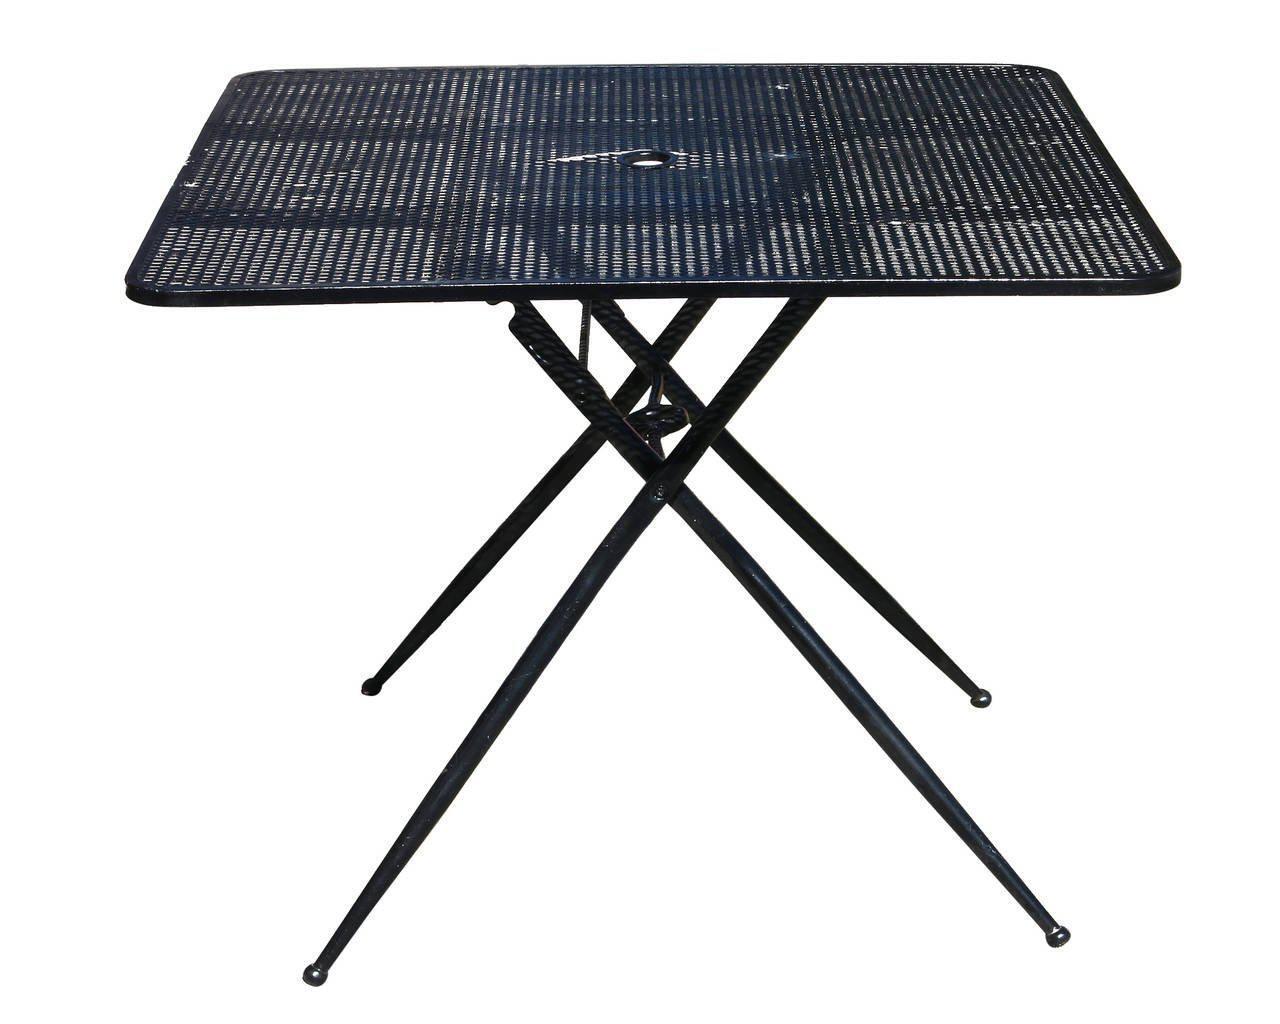 Mid-20th Century Salterini Mid-Century Modern Steel Outdoor or Patio Dining Set with Four Chairs